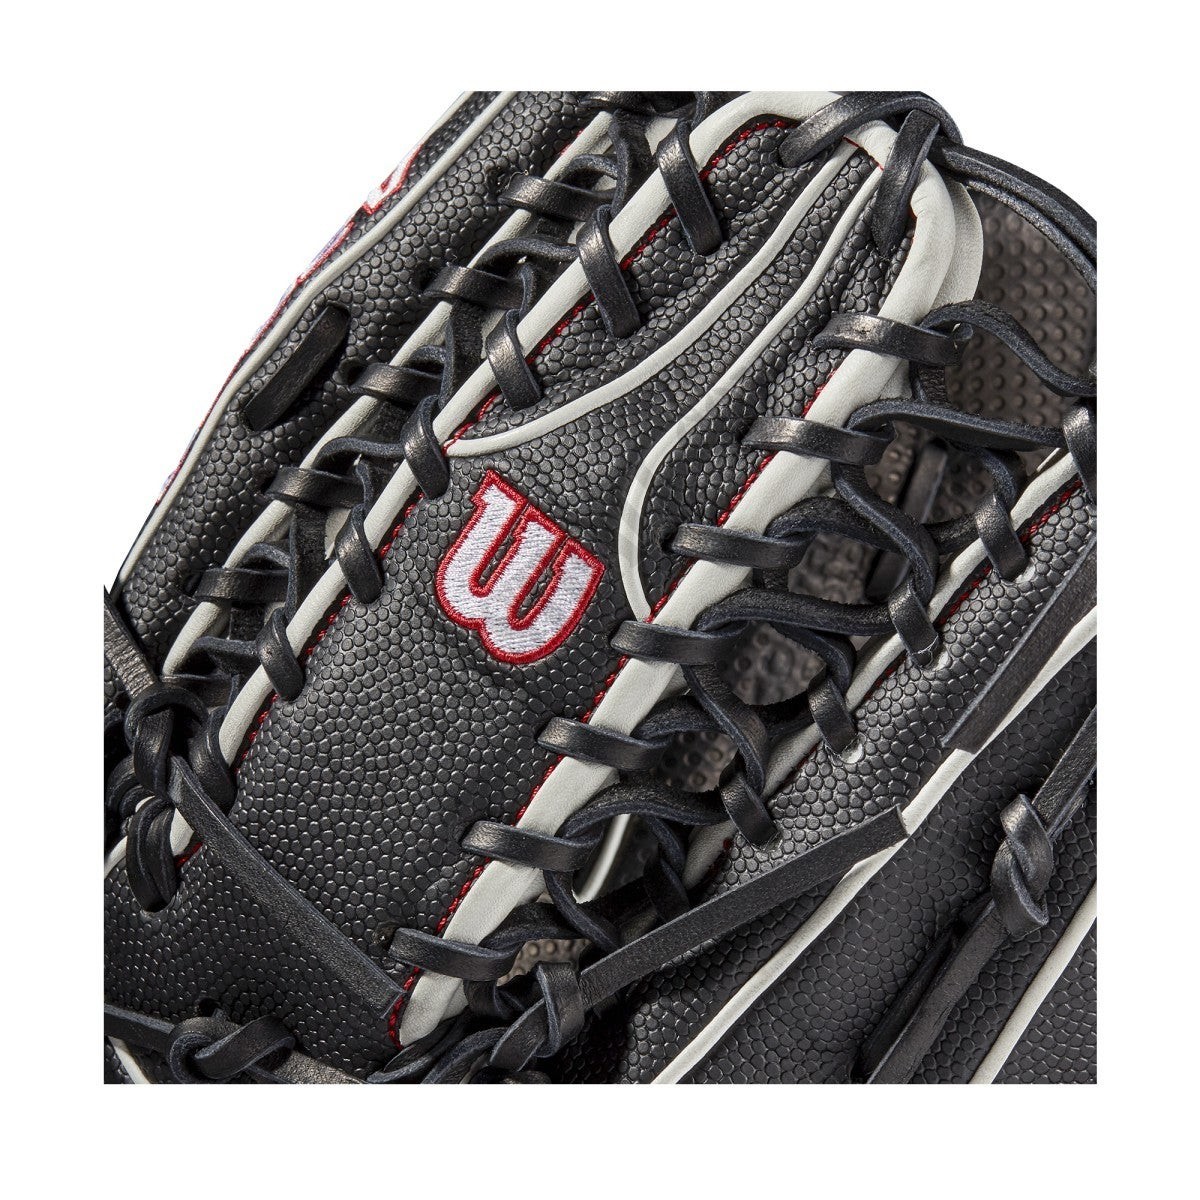 2021 A2000 SCOT7SS 12.75" Outfield Baseball Glove ● Wilson Promotions - -5